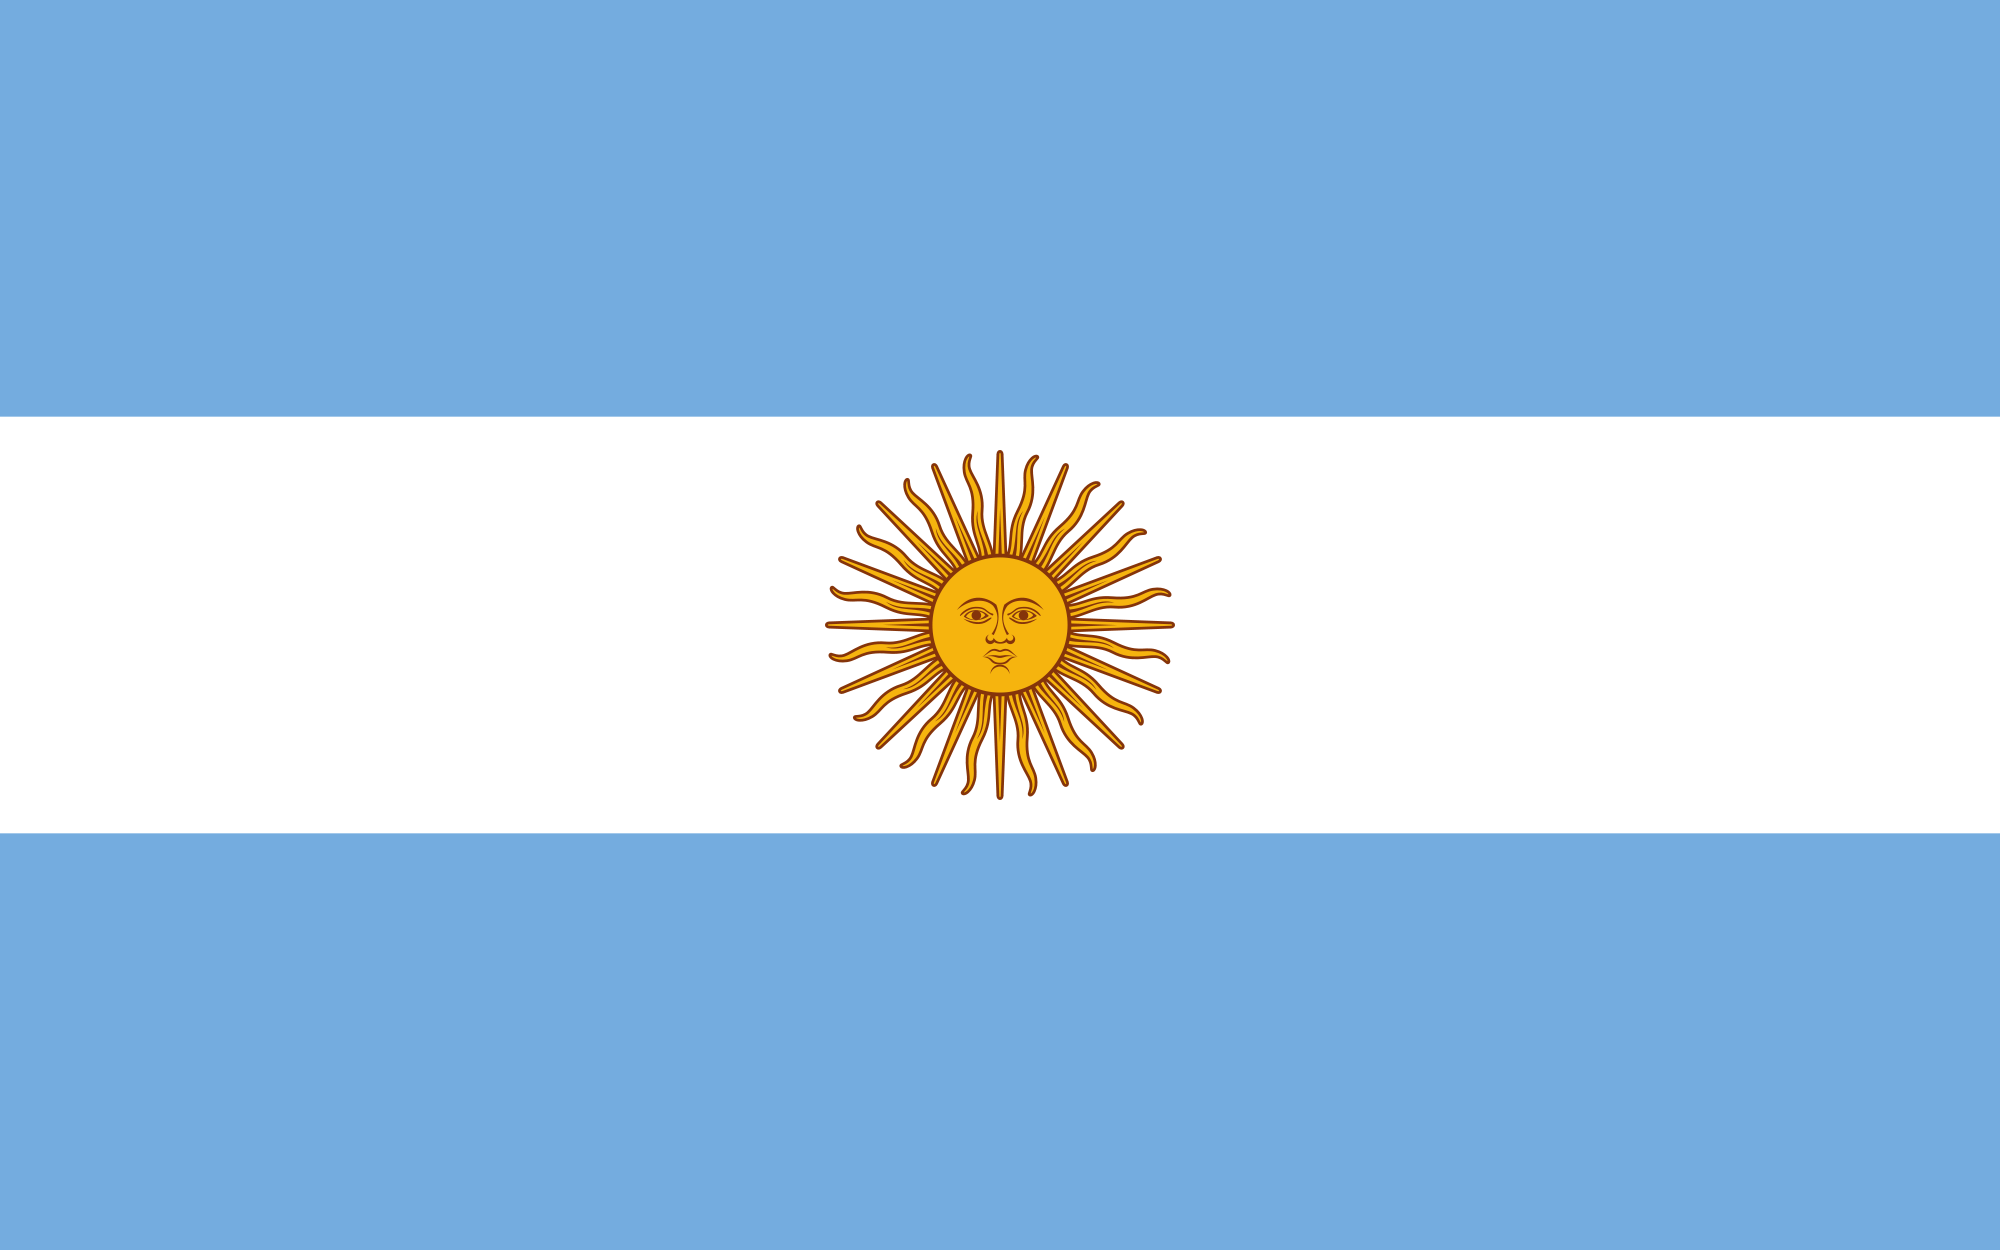 https://upload.wikimedia.org/wikipedia/commons/thumb/1/1a/Flag_of_Argentina.svg/2000px-Flag_of_Argentina.svg.png